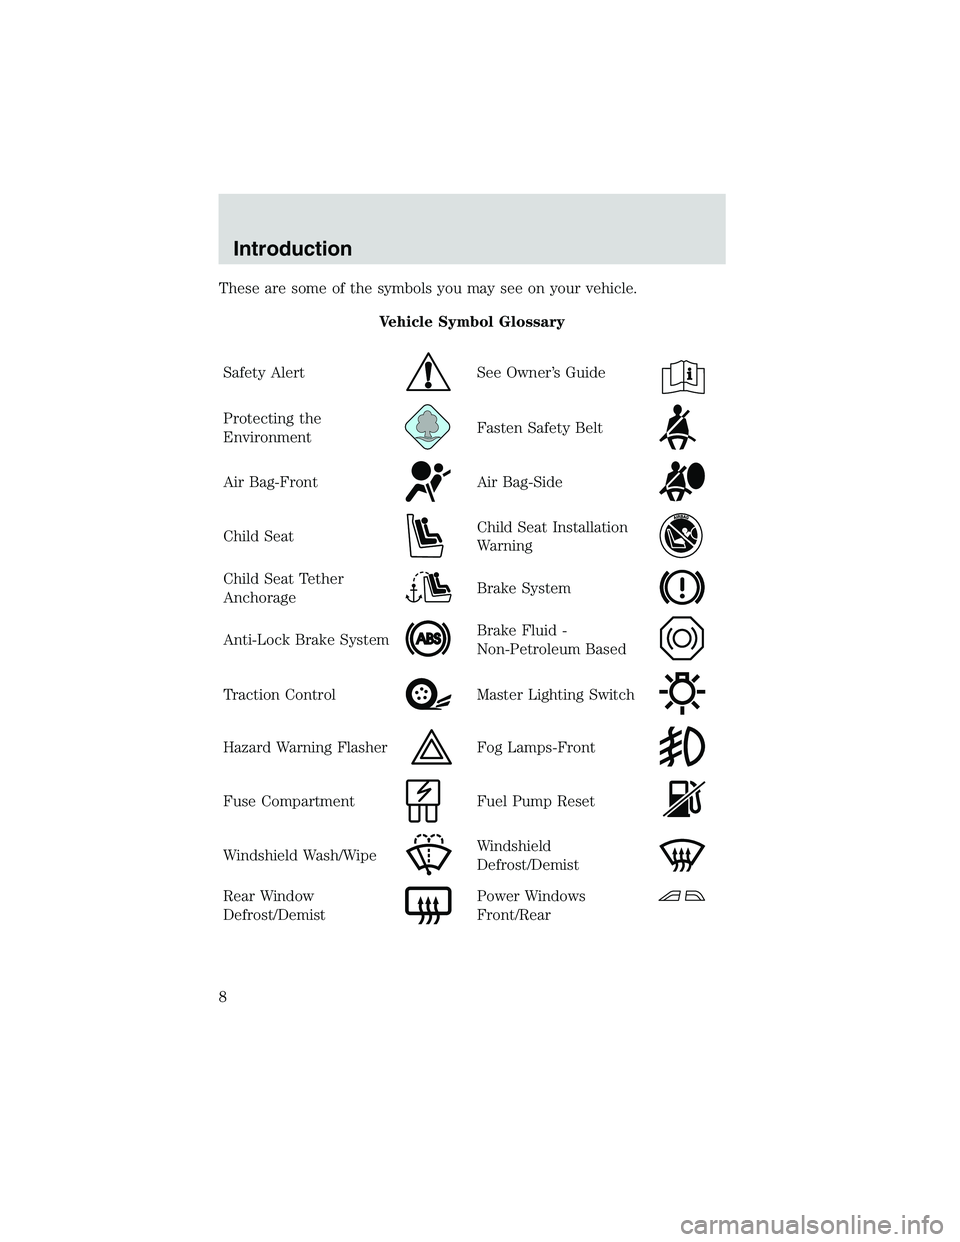 MAZDA MODEL B3000 4WD 2002  Owners Manual These are some of the symbols you may see on your vehicle.Vehicle Symbol Glossary
Safety Alert
See Owner’s Guide
Protecting the
EnvironmentFasten Safety Belt
Air Bag-FrontAir Bag-Side
Child SeatChil